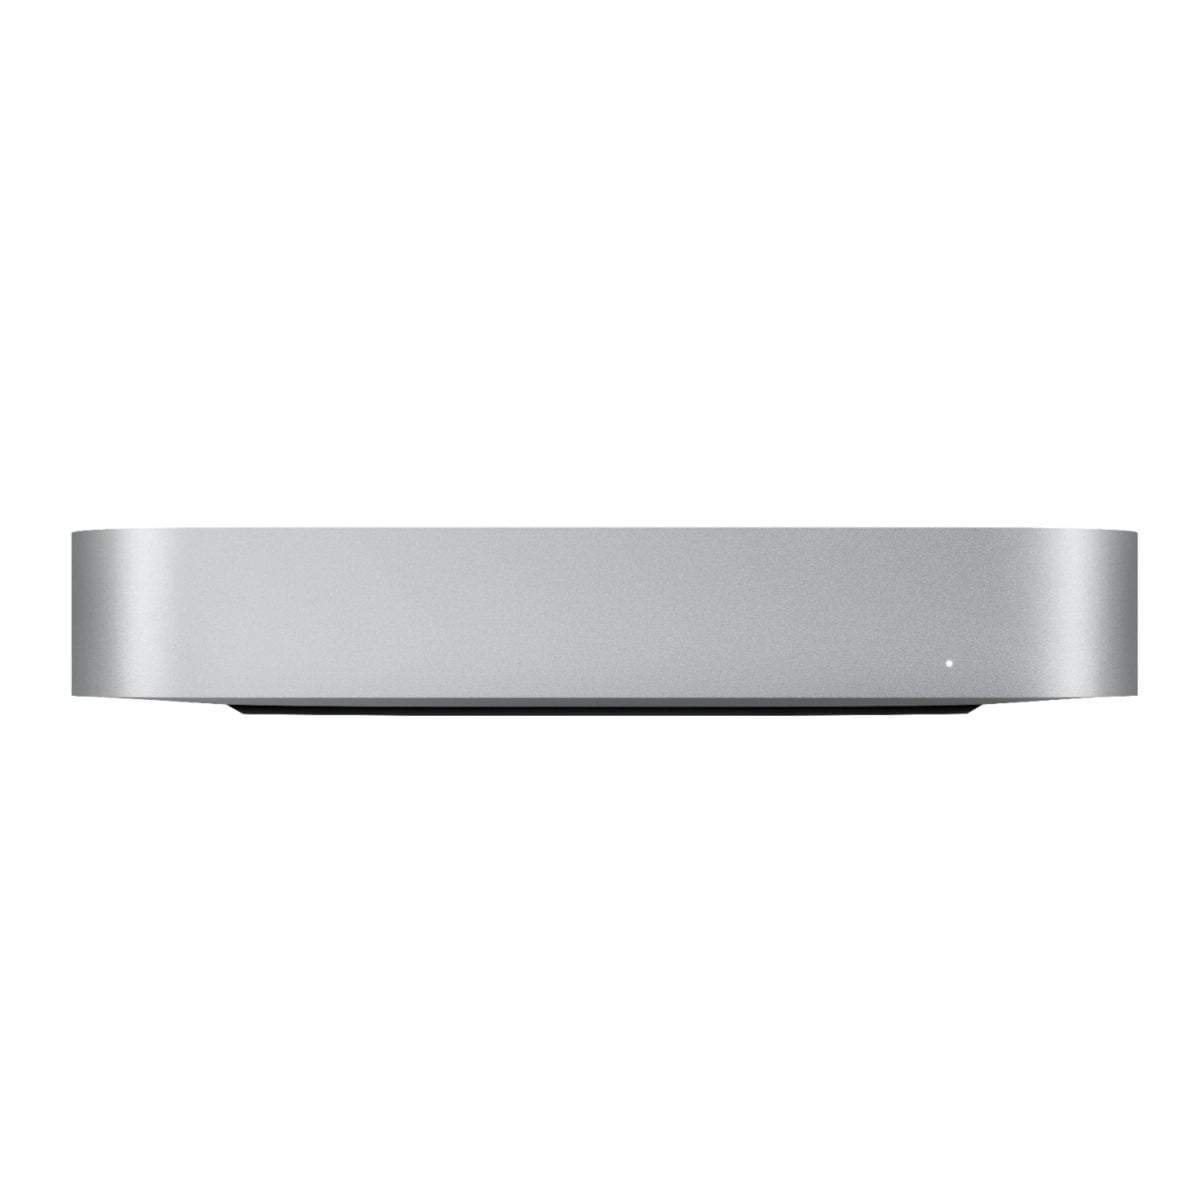 6427497Cv12D Scaled Apple &Lt;H1 Class=&Quot;Heading-5 V-Fw-Regular&Quot;&Gt;Mac Mini Desktop - Apple M1 Chip - 8Gb Memory - 256Gb Ssd (Latest Model) - Silver&Lt;/H1&Gt; Https://Www.youtube.com/Watch?V=3Oq__Scnyna Mac Mini, The Most Versatile, Do-It-All Mac Desktop, To A Whole New Level Of Performance. With Up To 3X Faster Cpu Performance, Up To 6X Faster Graphics, A Powerful Neural Engine With Up To 15X Faster Machine Learning, And Superfast Unified Memory — All In An Ultracompact Design.so You Can Create, Work, And Play On Mac Mini With Speed And Power Beyond Anything You Ever Imagined. Mac Mini Mac Mini Desktop - Apple M1 Chip - 8Gb Memory - 256Gb Ssd (Latest Model) - Silver Mgnr3